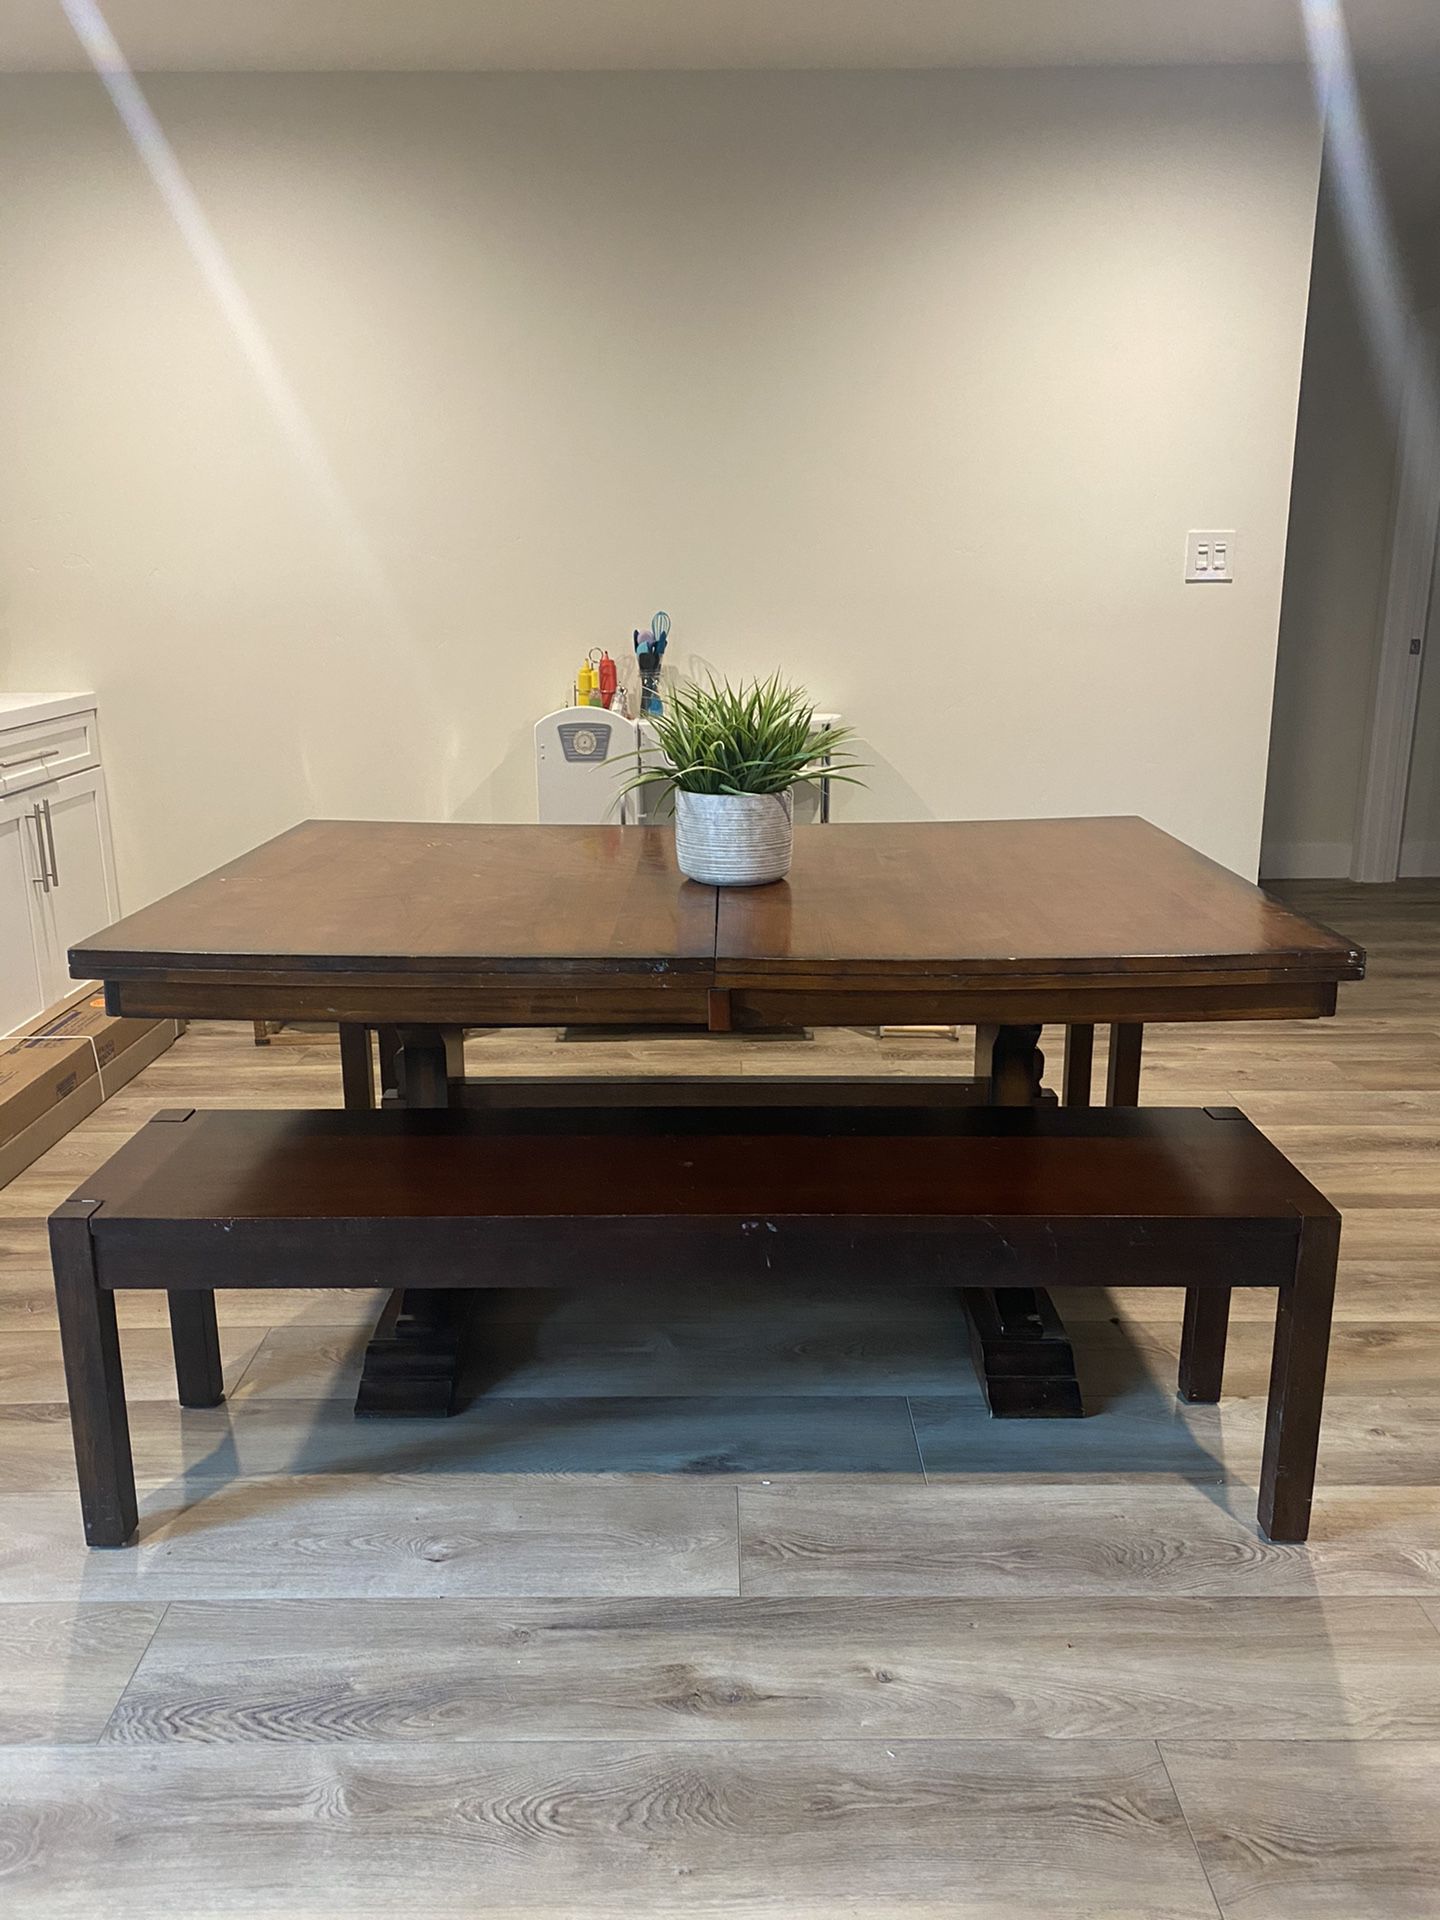 Wood dining kitchen table with extender leaf and 2 benches